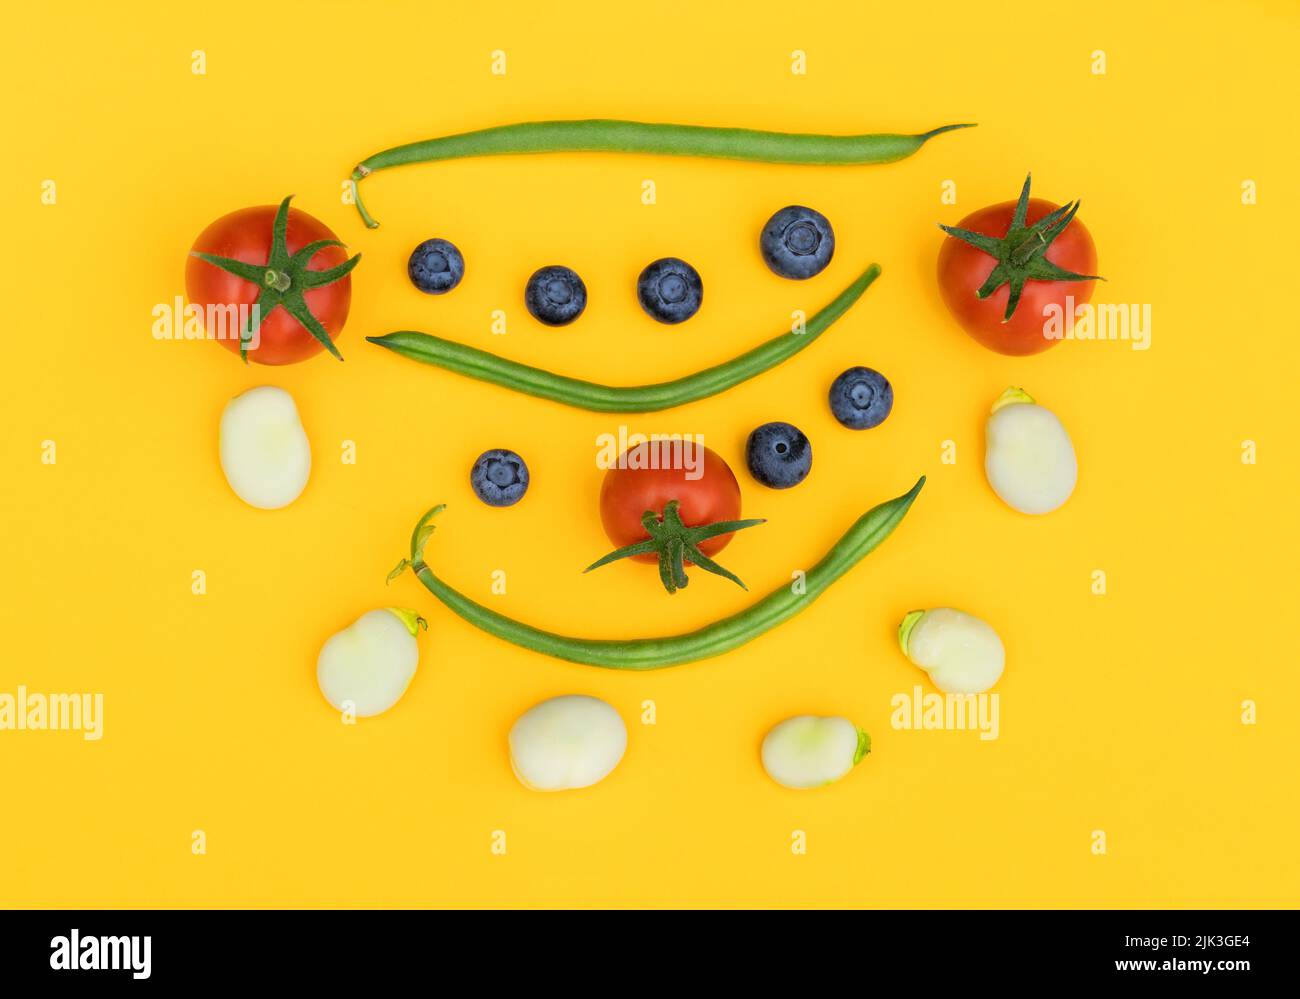 The Good Life. A collection of home grown fruit and vegetables against a vibrant yellow background. Promoting a healthy lifestyle in a fun way. Stock Photo